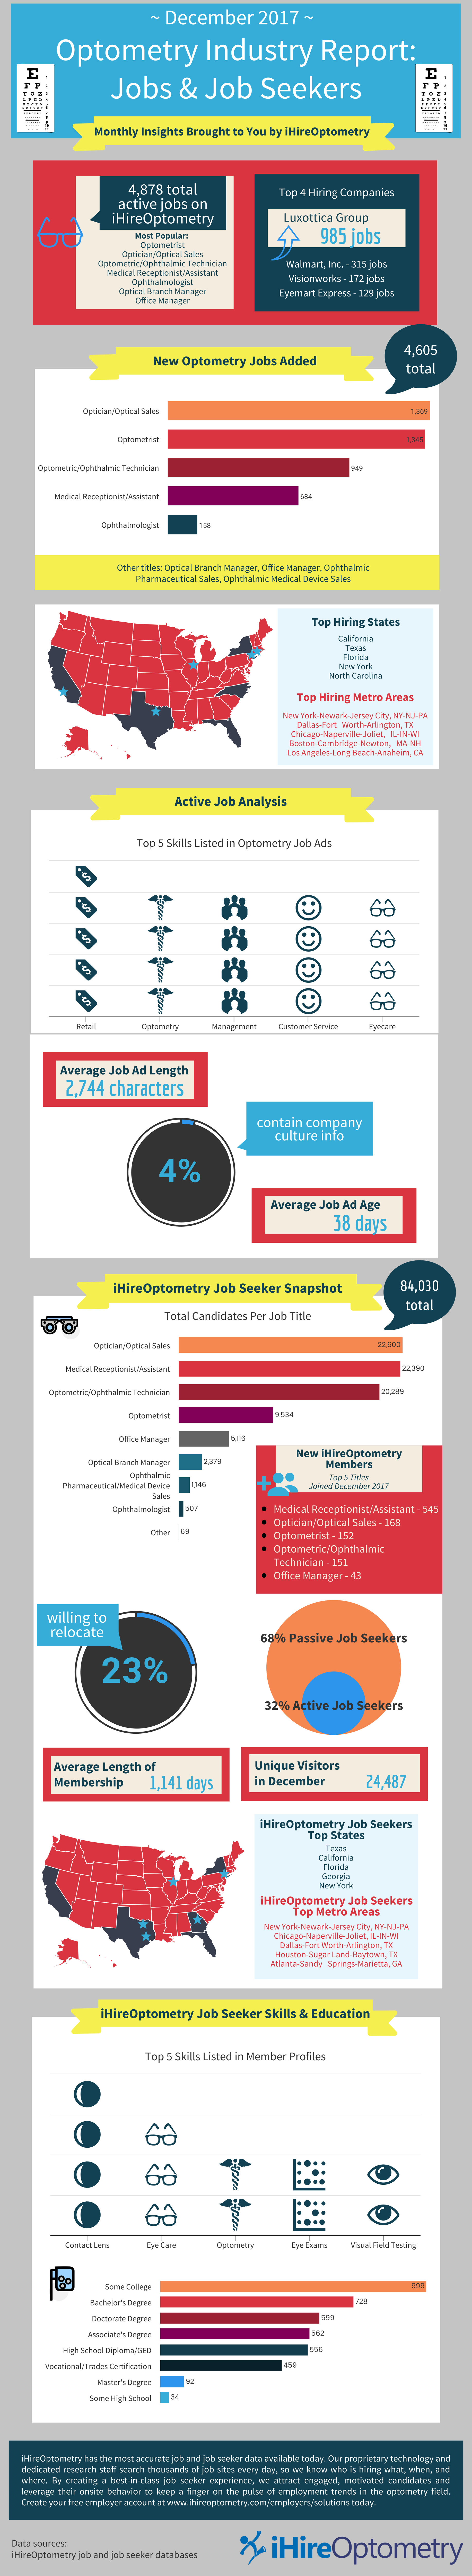 iHireOptometry industry report infographic for December 2017